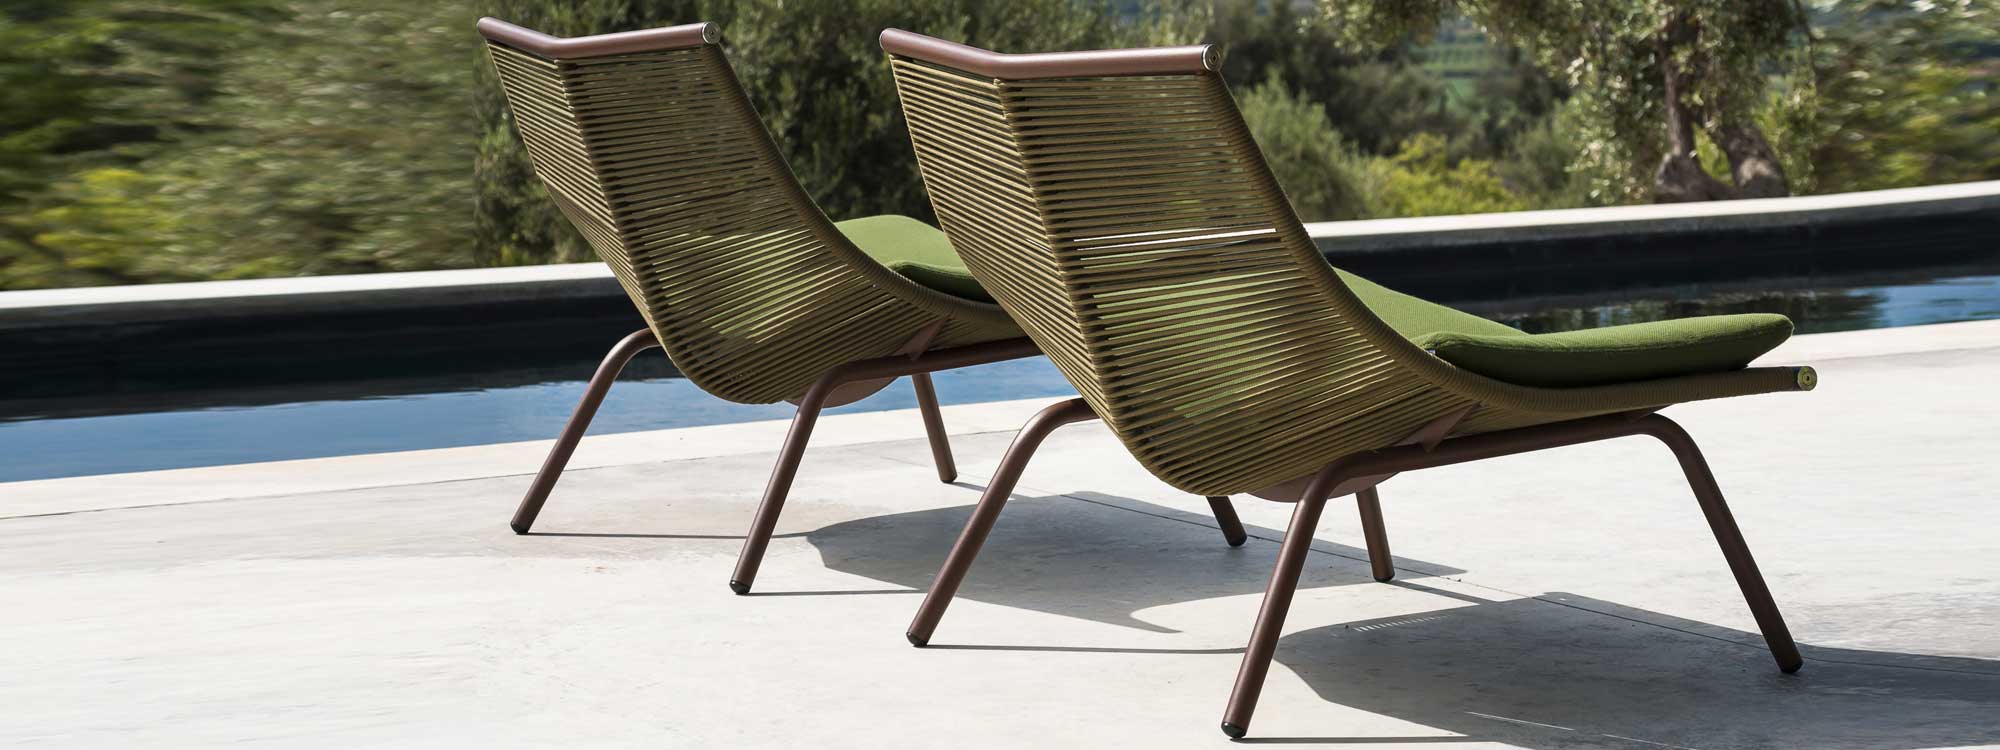 Image of pair of RODA Laze modern garden chairs with rust-colored frame and olive-colored cord seat and back by swimming pool